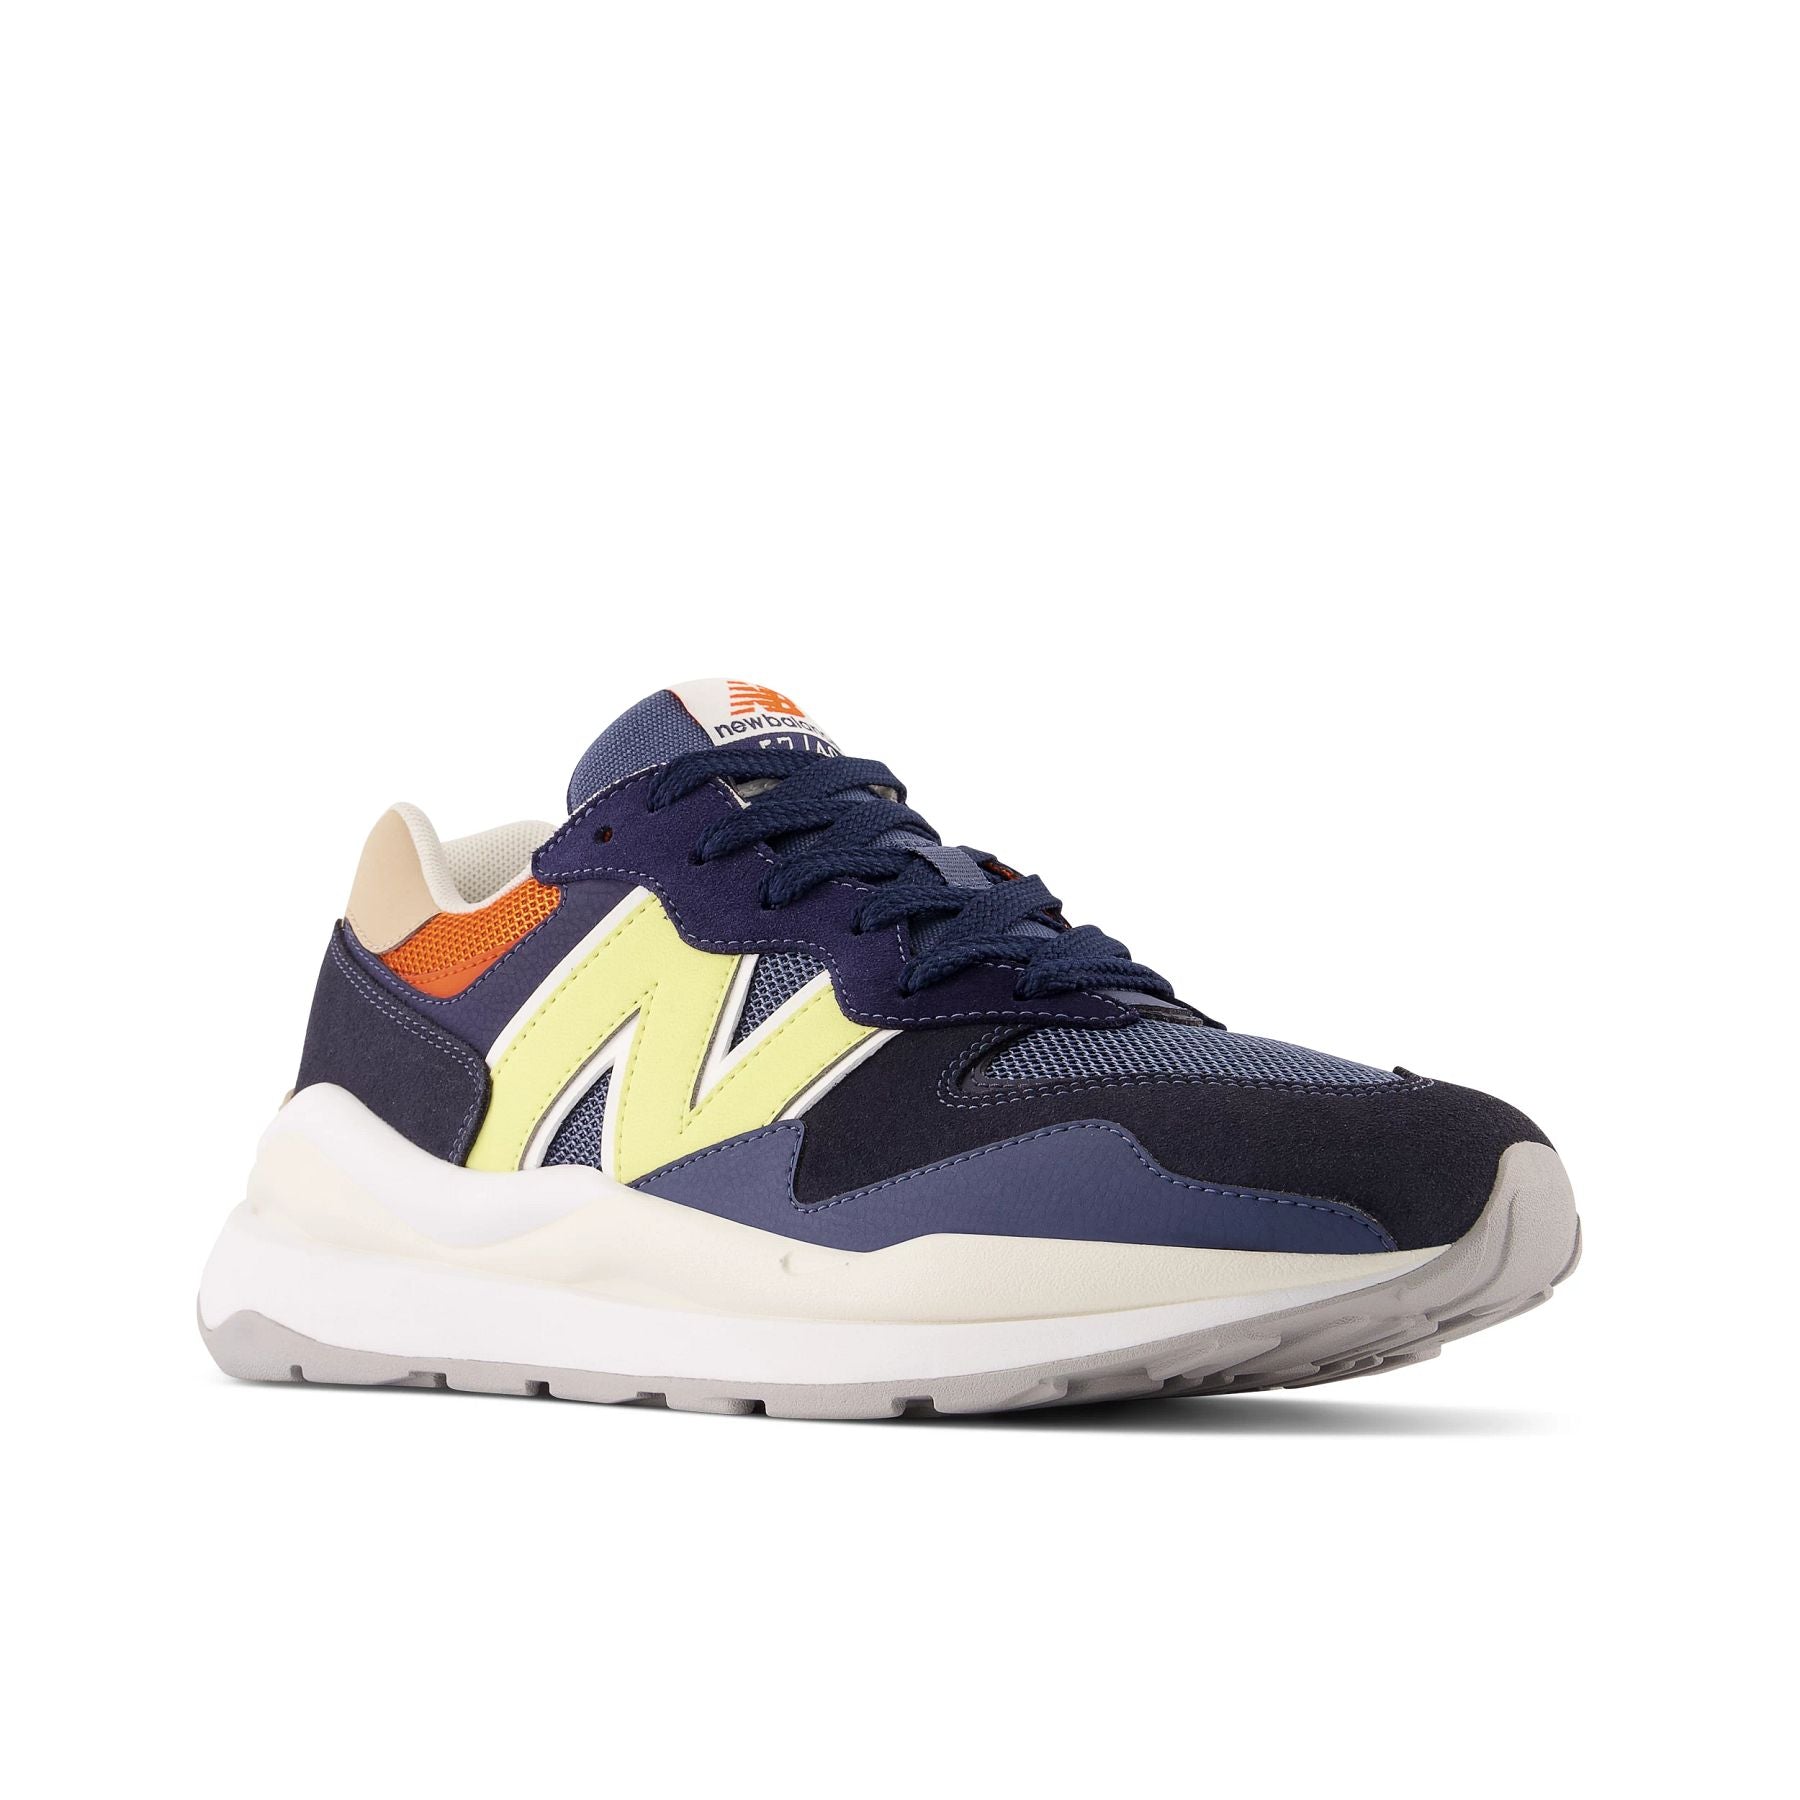 Front angle view of the Men's 5740 Lifestyle shoe by New Balance in the color Eclipse